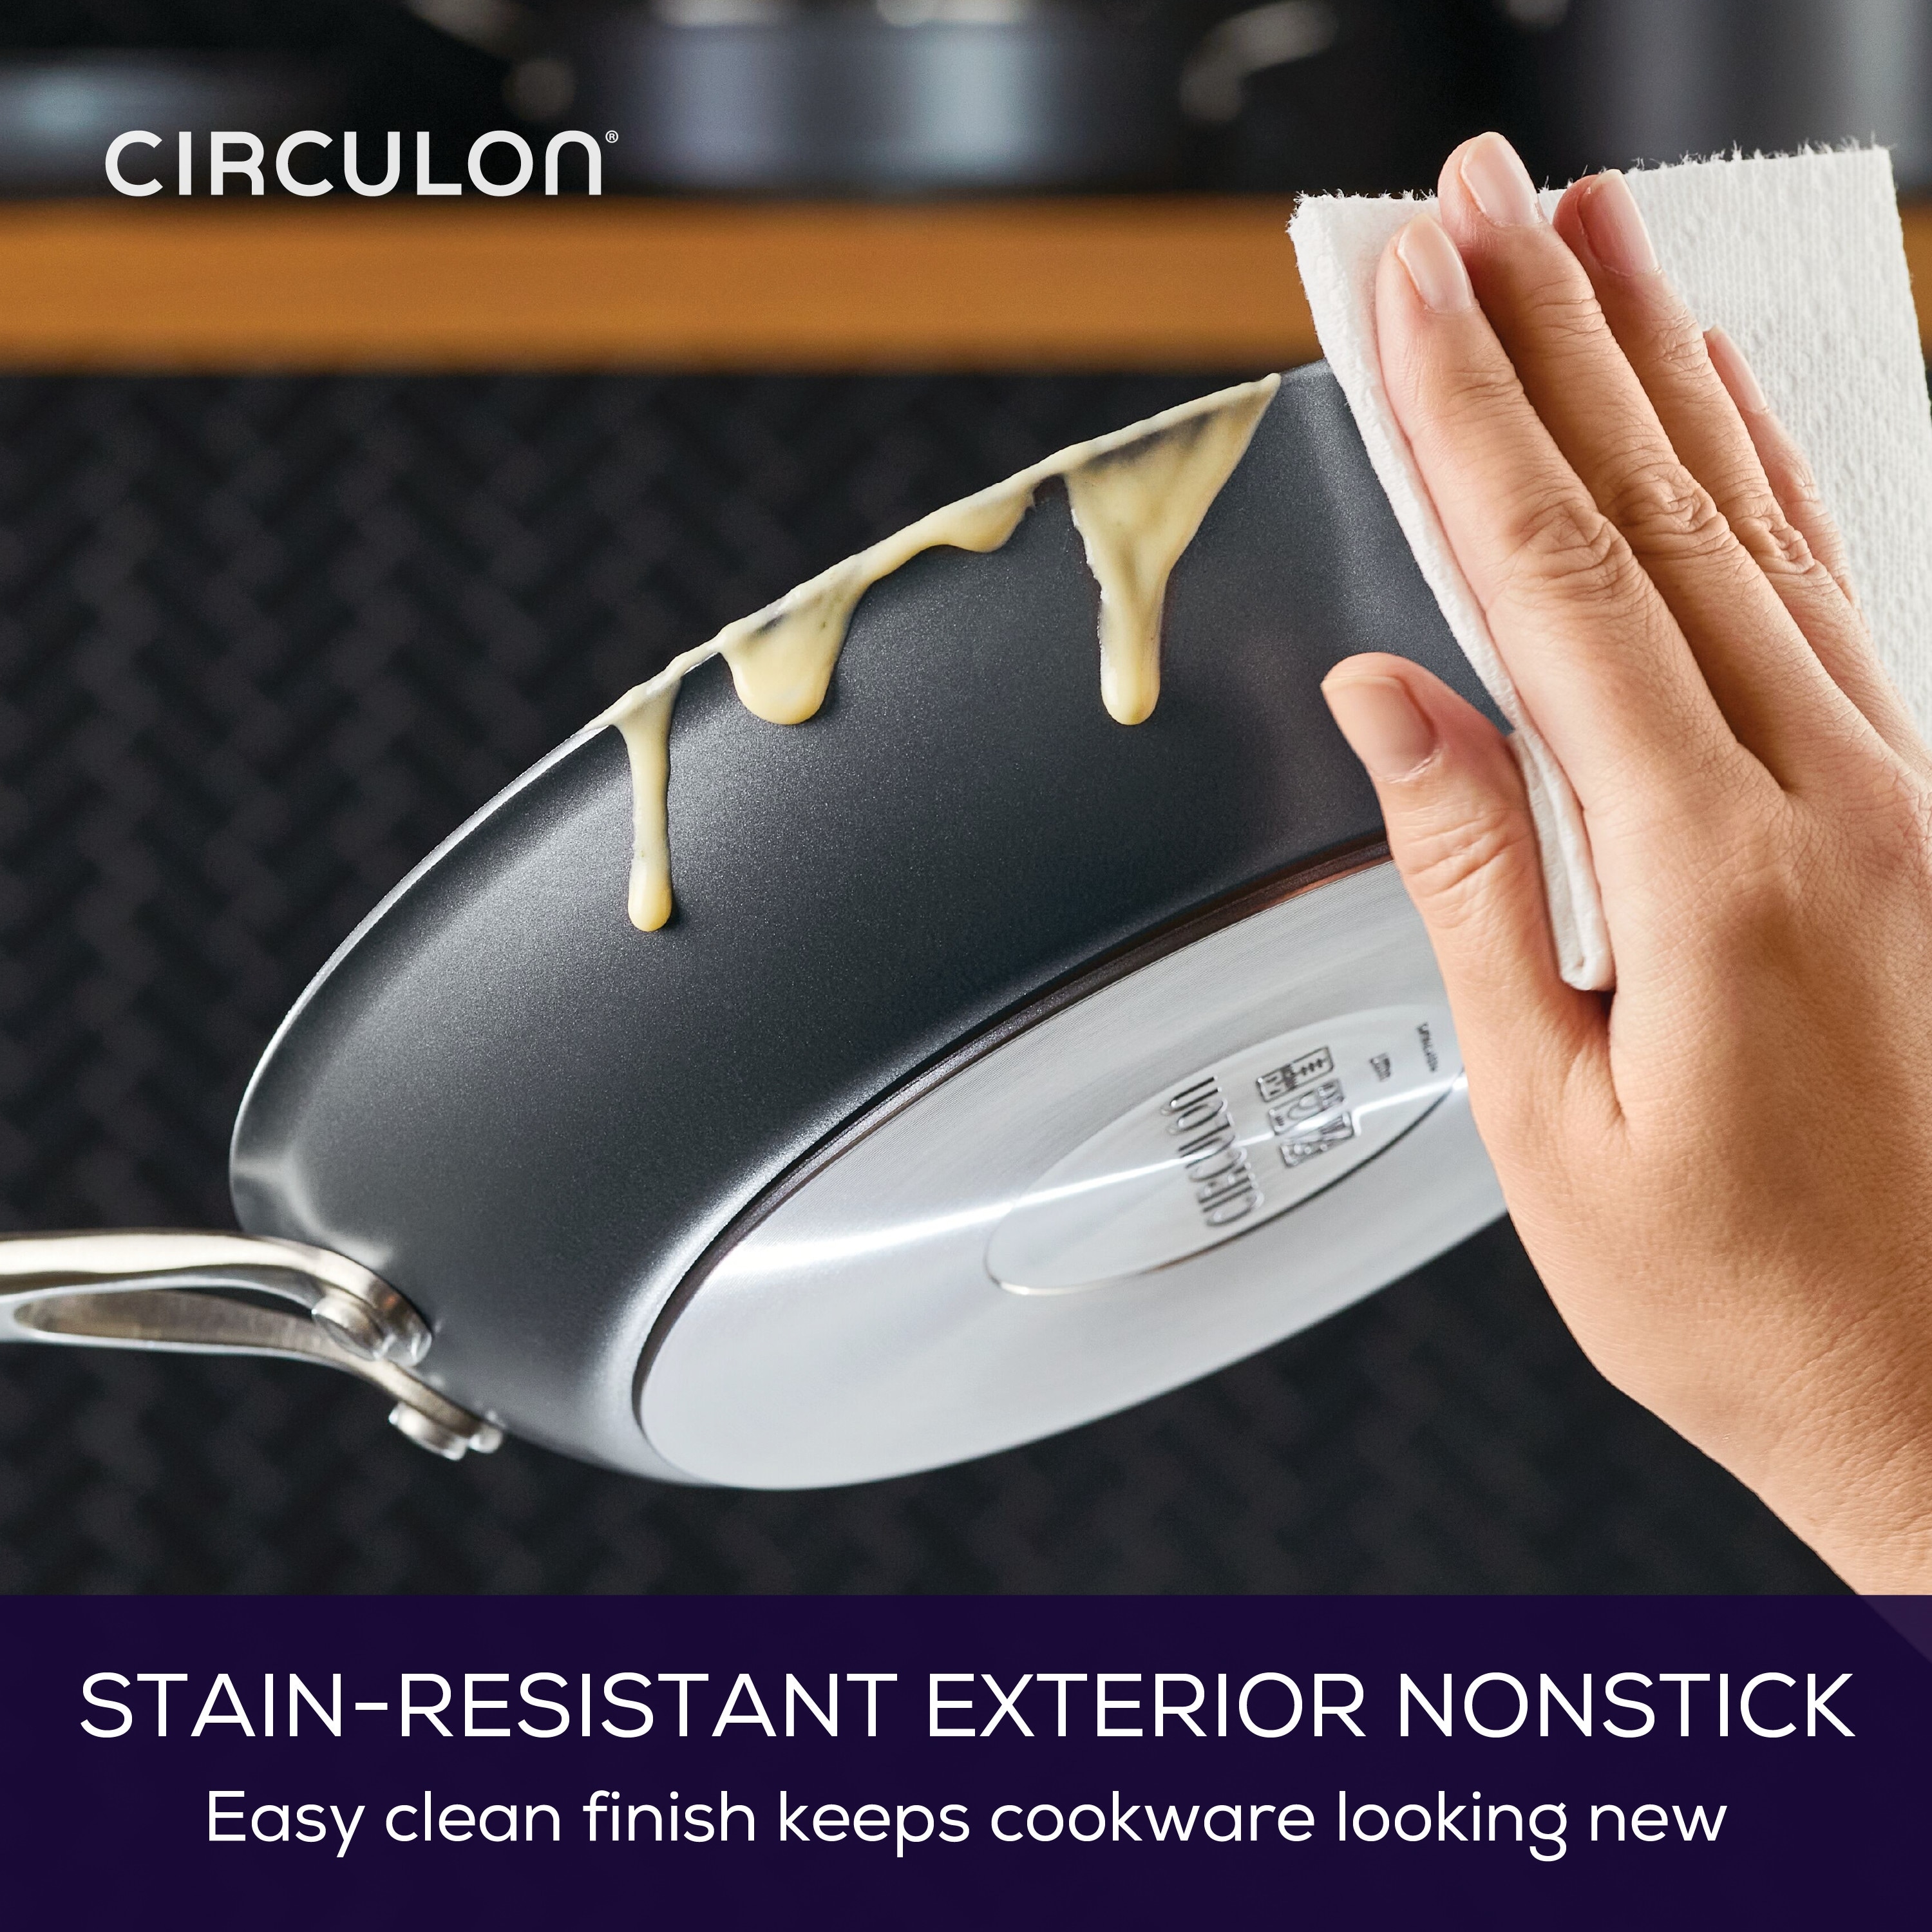 https://ak1.ostkcdn.com/images/products/is/images/direct/c7adf6ab2b2cc866b25c1fbec4473d471ee7d4e6/Circulon-A1-Series-with-ScratchDefense-Technology-Nonstick-Induction-Frying-Pan%2C-10-Inch%2C-Graphite.jpg